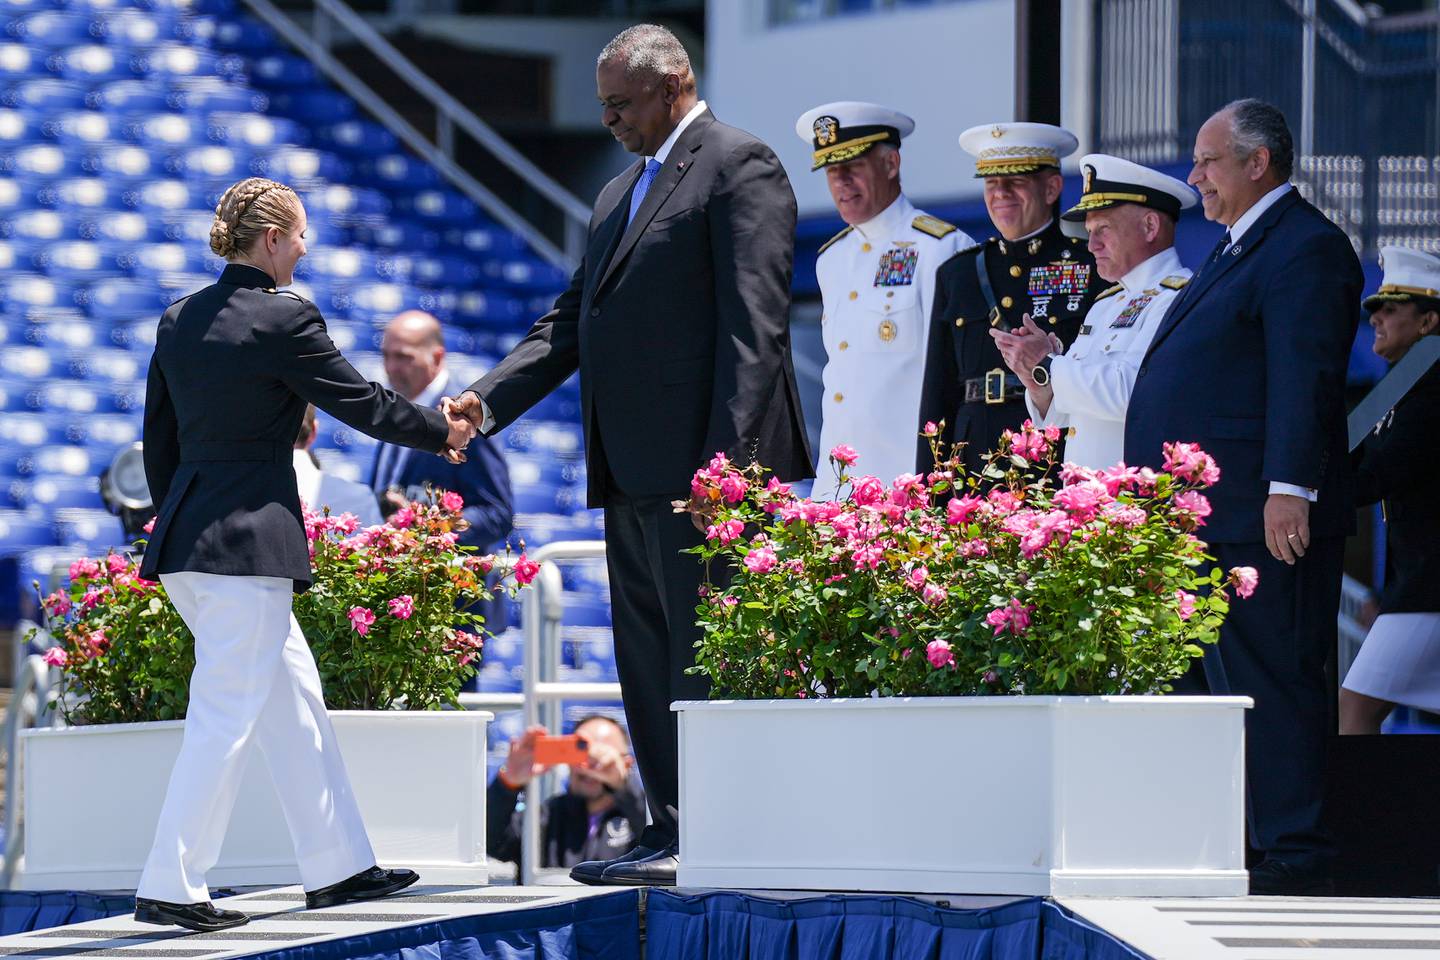 Megan Sara Welch, the last student on the list in 30th Company, approaches the stage to receive her diploma and shake hands with U.S. Secretary of Defense Lloyd James Austin III during the U.S. Naval Academy’s graduation ceremony at the Navy-Marine Corps Memorial Stadium on May 26, 2023. The graduating midshipmen are commissioned as either an ensign in the U.S. Navy or a 2nd Lieutenant in the U.S. Marine Corps.